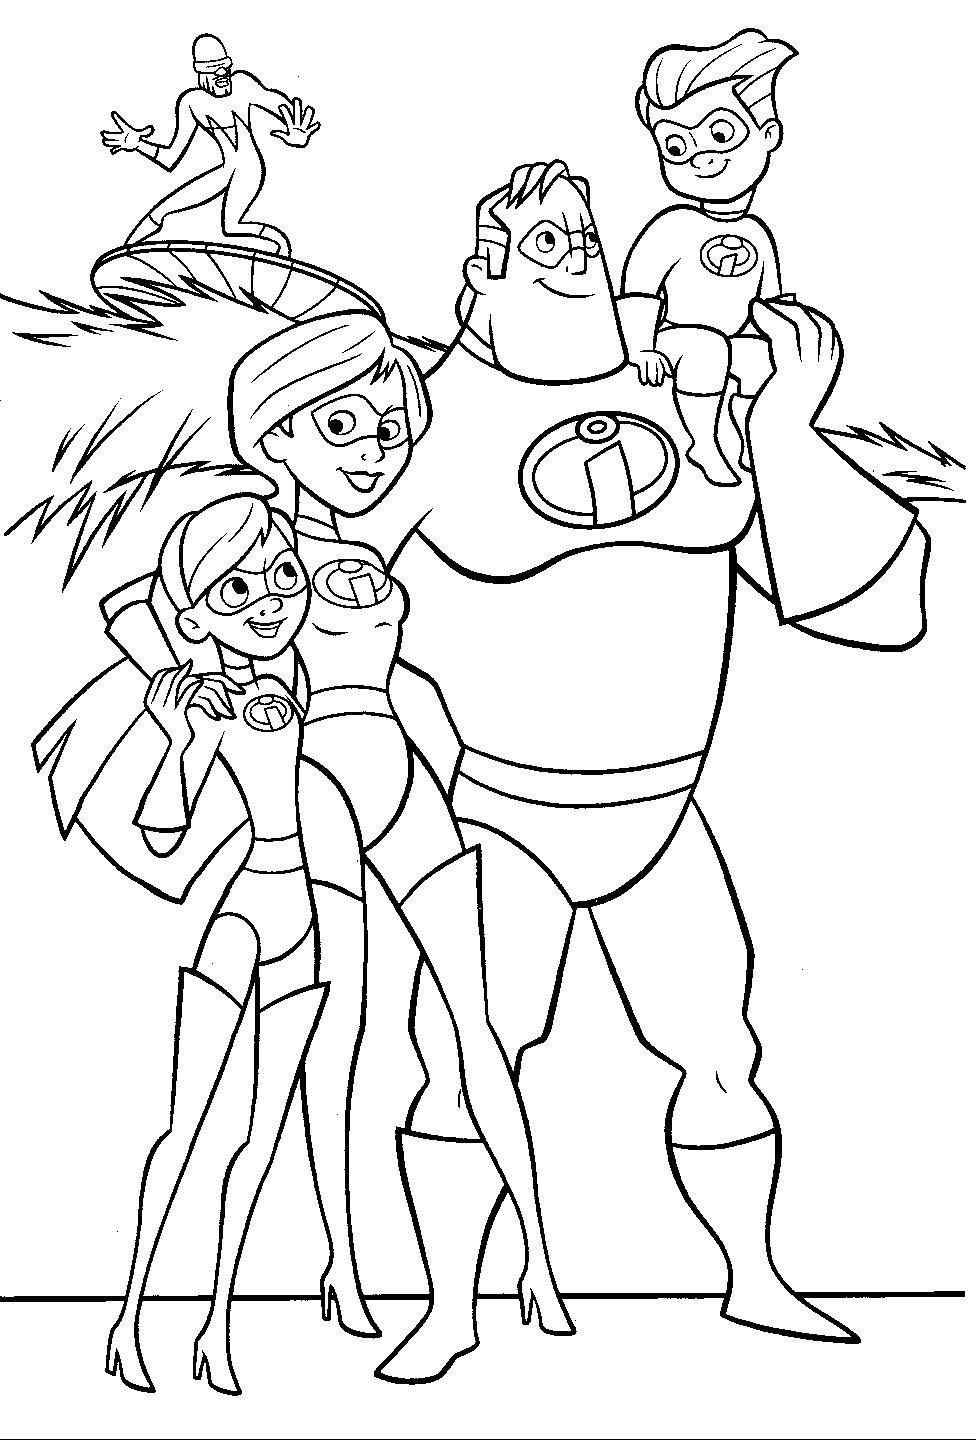 Coloring Pages For Big Boys
 Incredibles free coloring pages for the boys